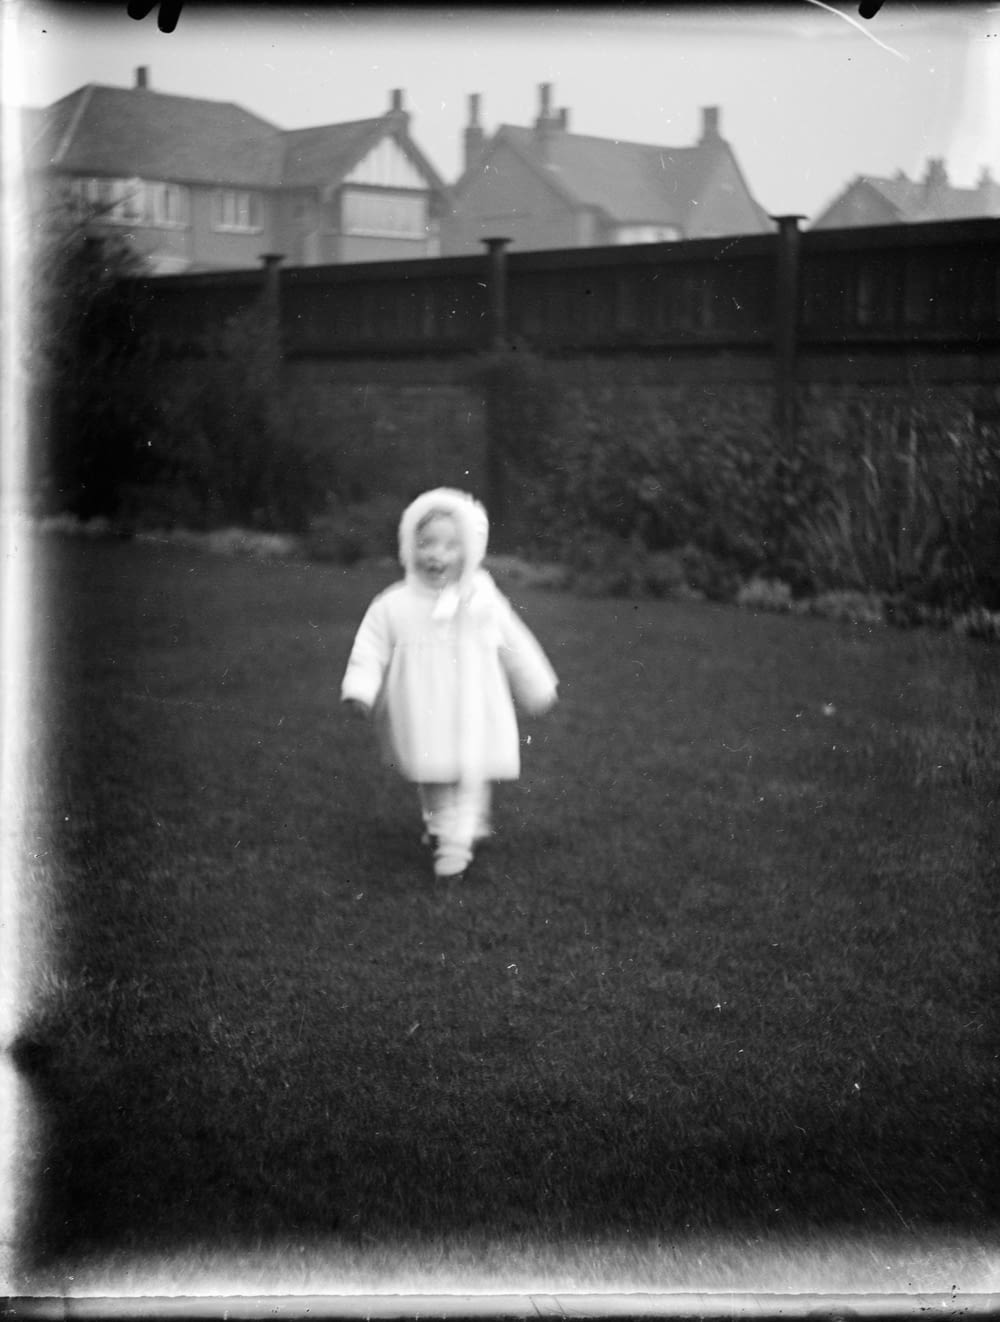 grayscale photo of child in white long sleeve shirt standing on grass field